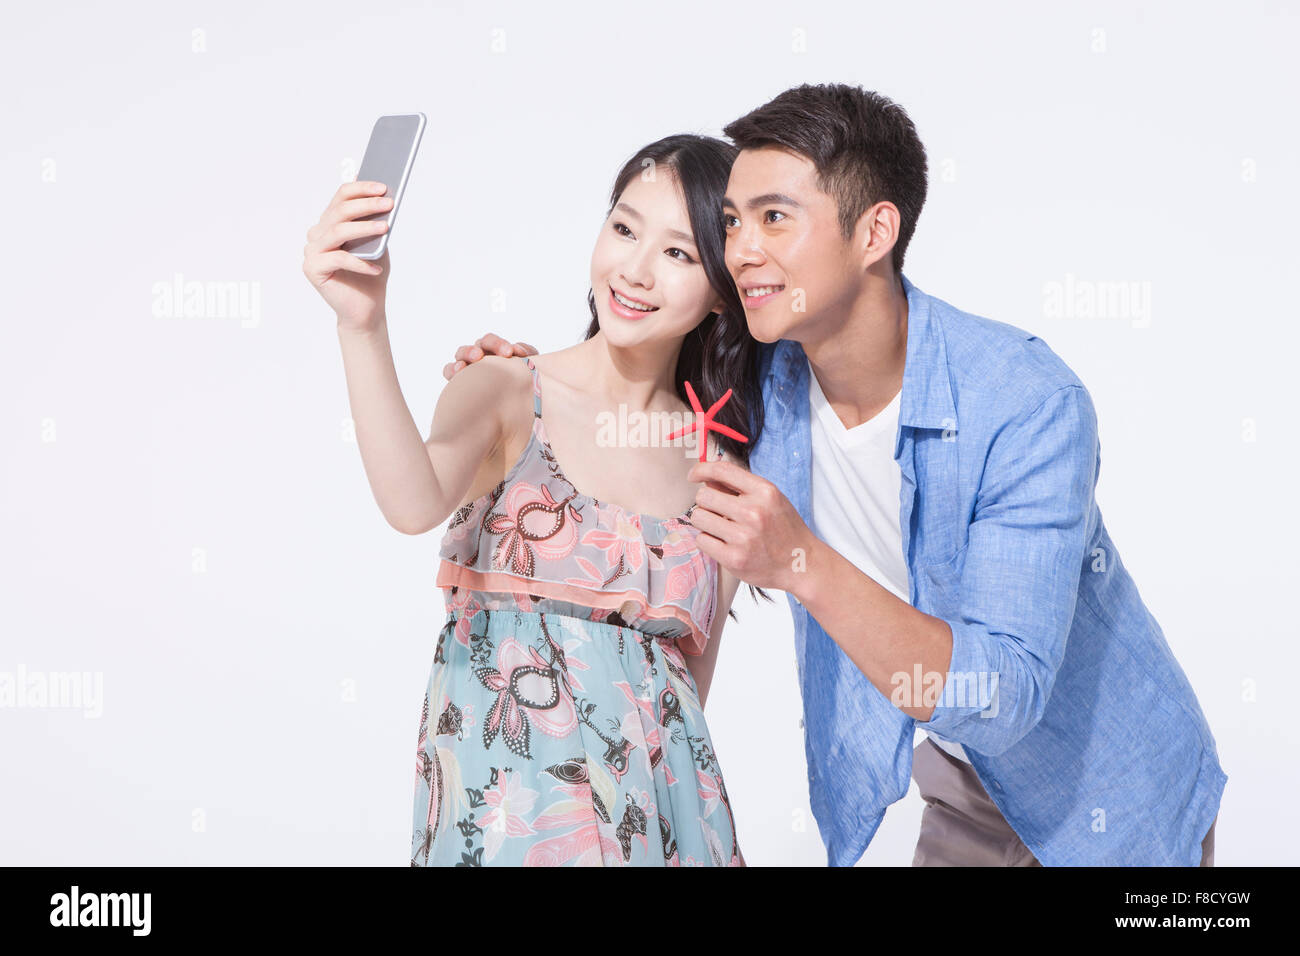 Couple in casual wear taking a self photo together with a starfish in man's hand Stock Photo